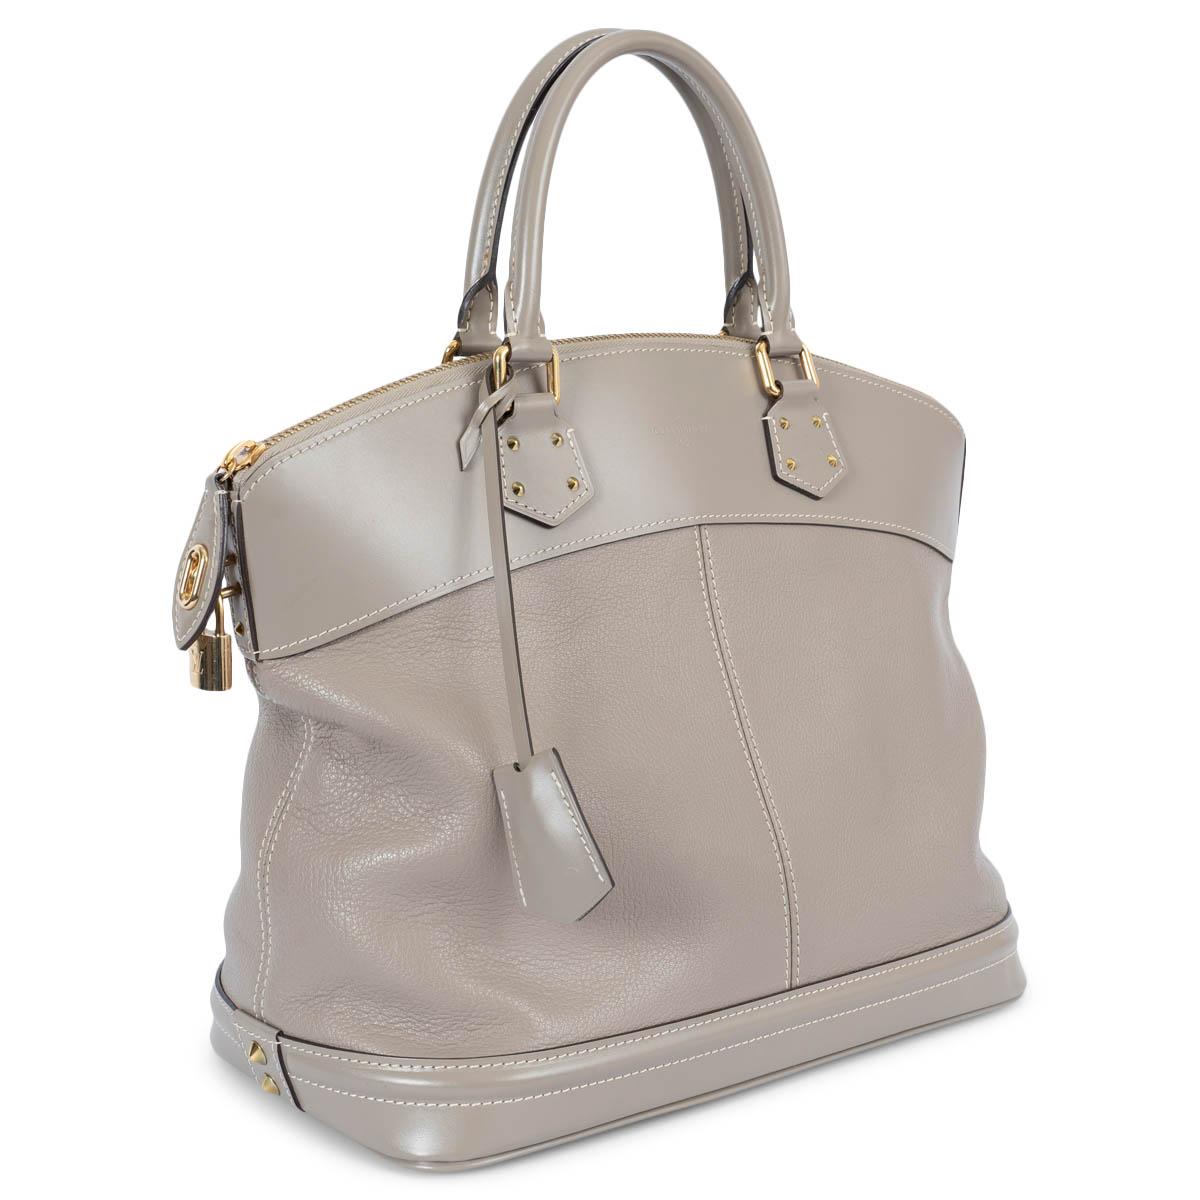 100% authentic Louis Vuitton Lockit MM handbag in taupe Suhali leather and hardware in gold-tone metal. The design features a zipper closure and is lined in taupe logo nylon with one zip pocket against the back and two open pockets against the